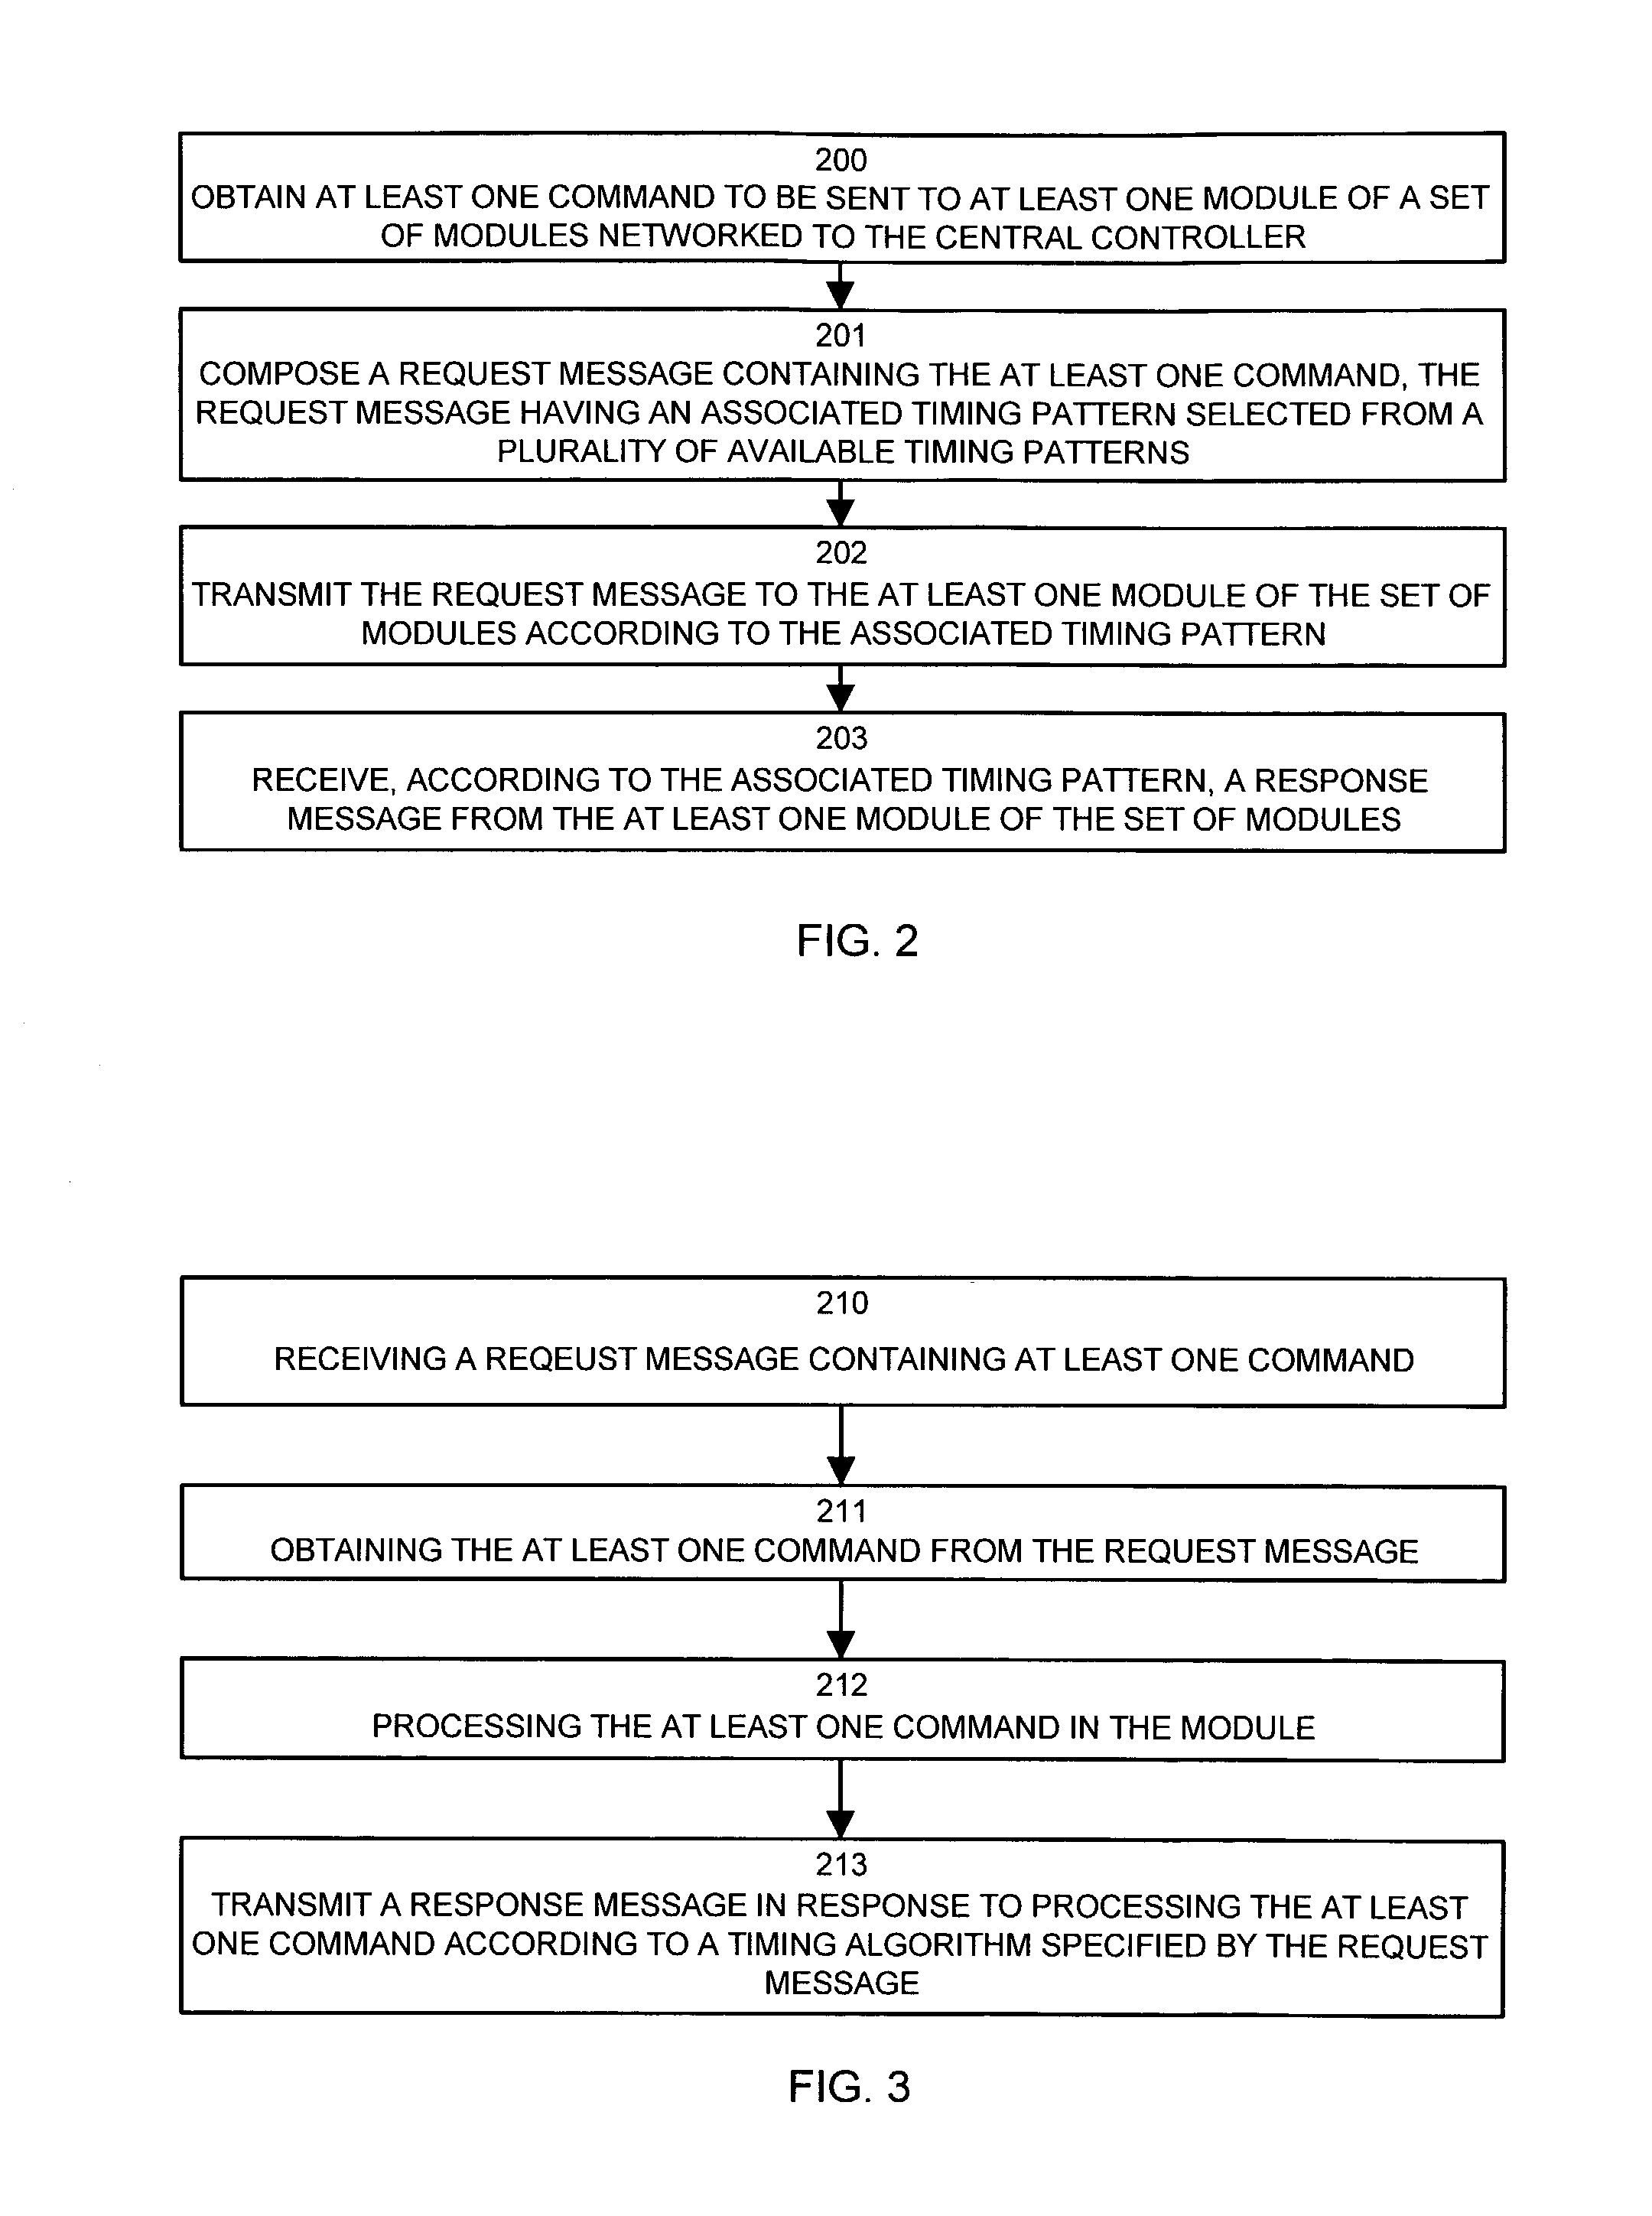 Methods and apparatus for performing data acquisition and control